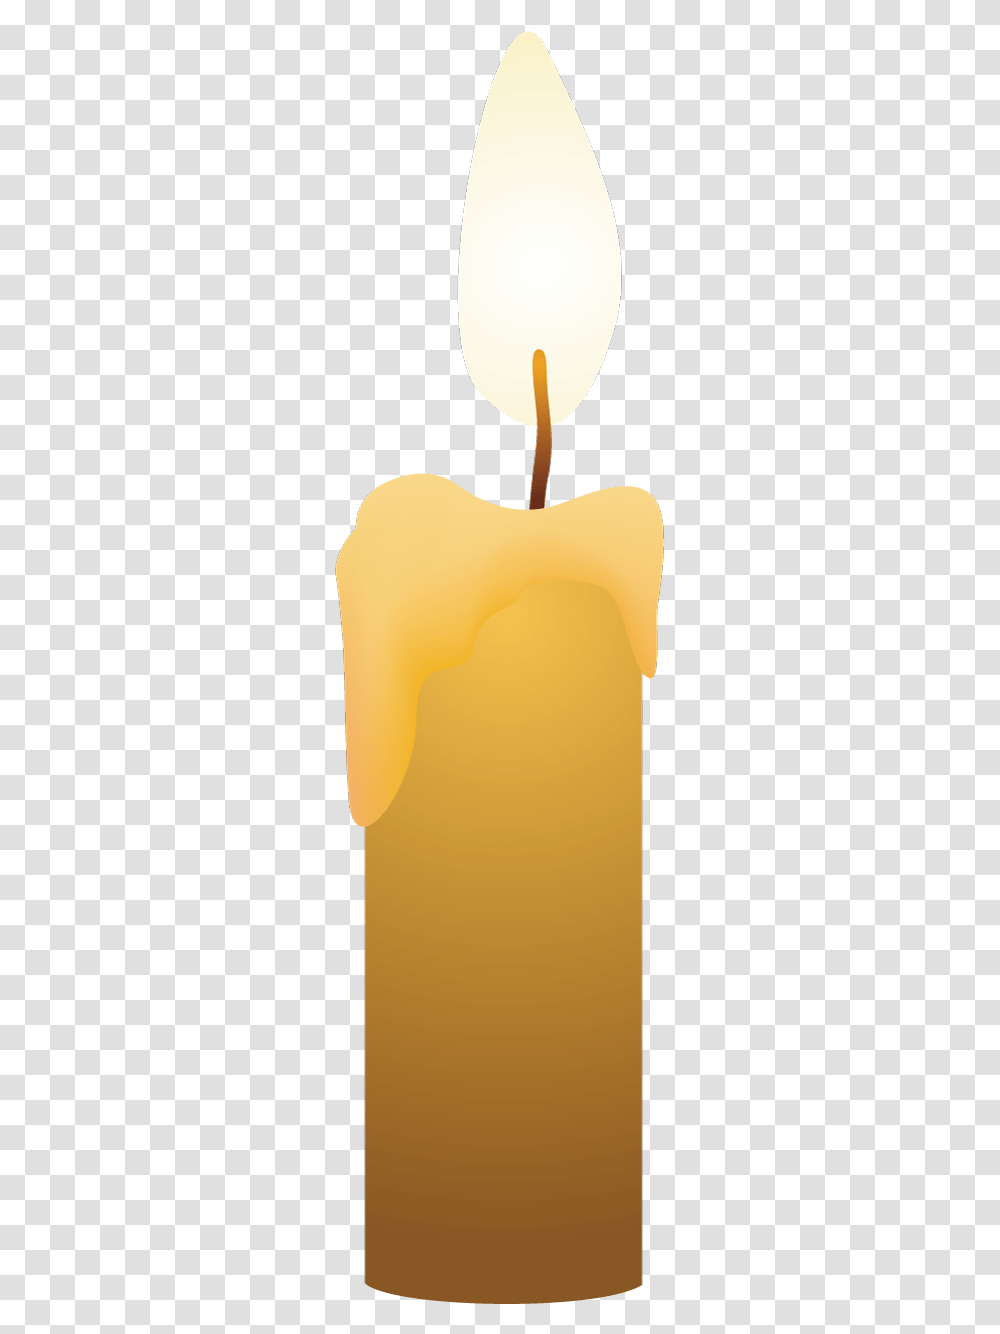 Candle Light Flame Clipart Download Apple, Lamp, Cushion, Shopping Bag, Sack Transparent Png